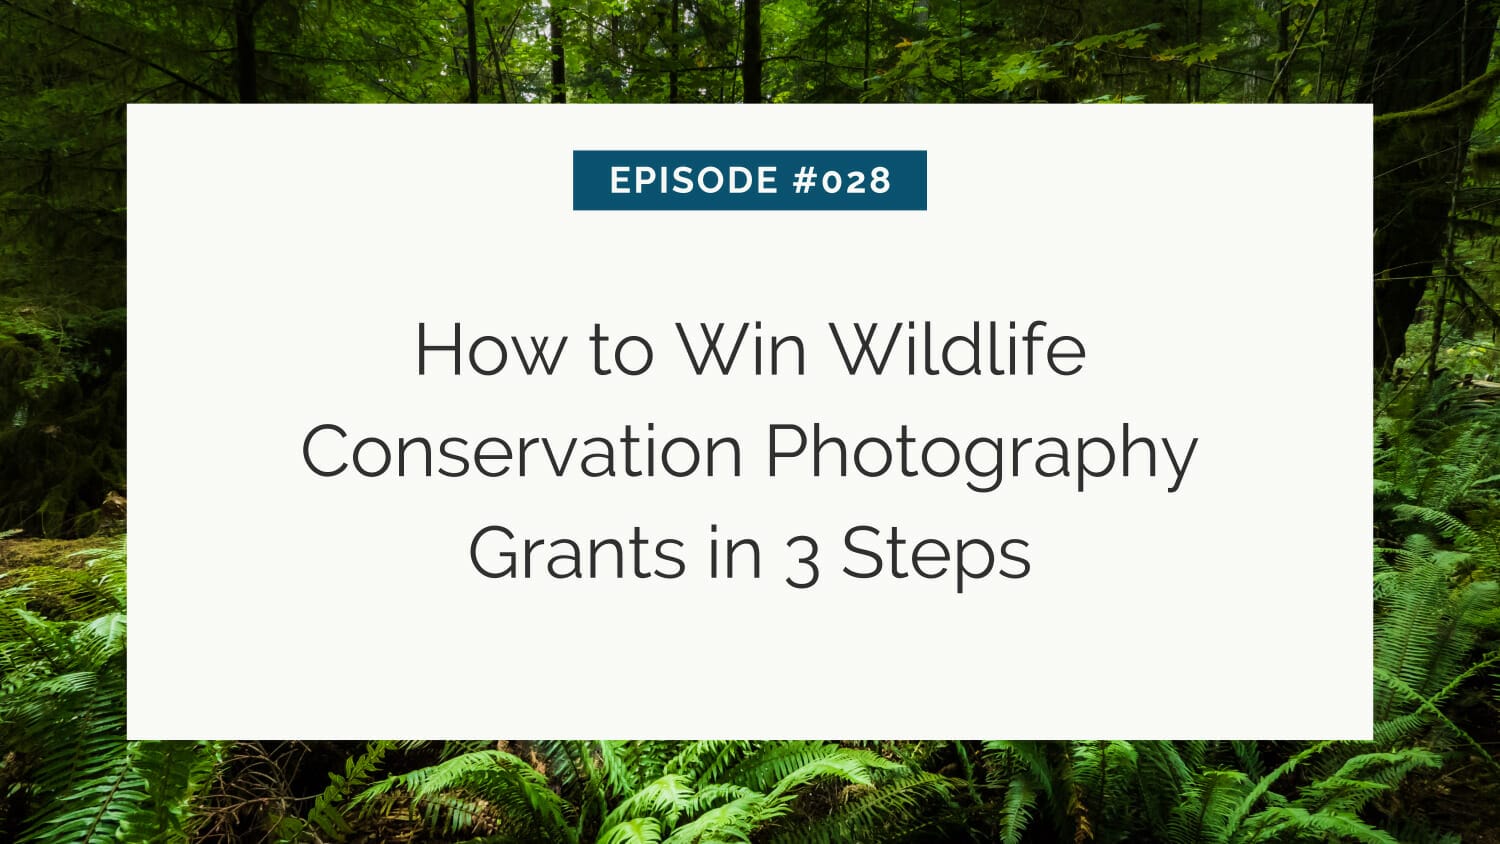 Podcast episode graphic detailing a three-step guide on winning wildlife conservation photography grants, set against a lush forest background.